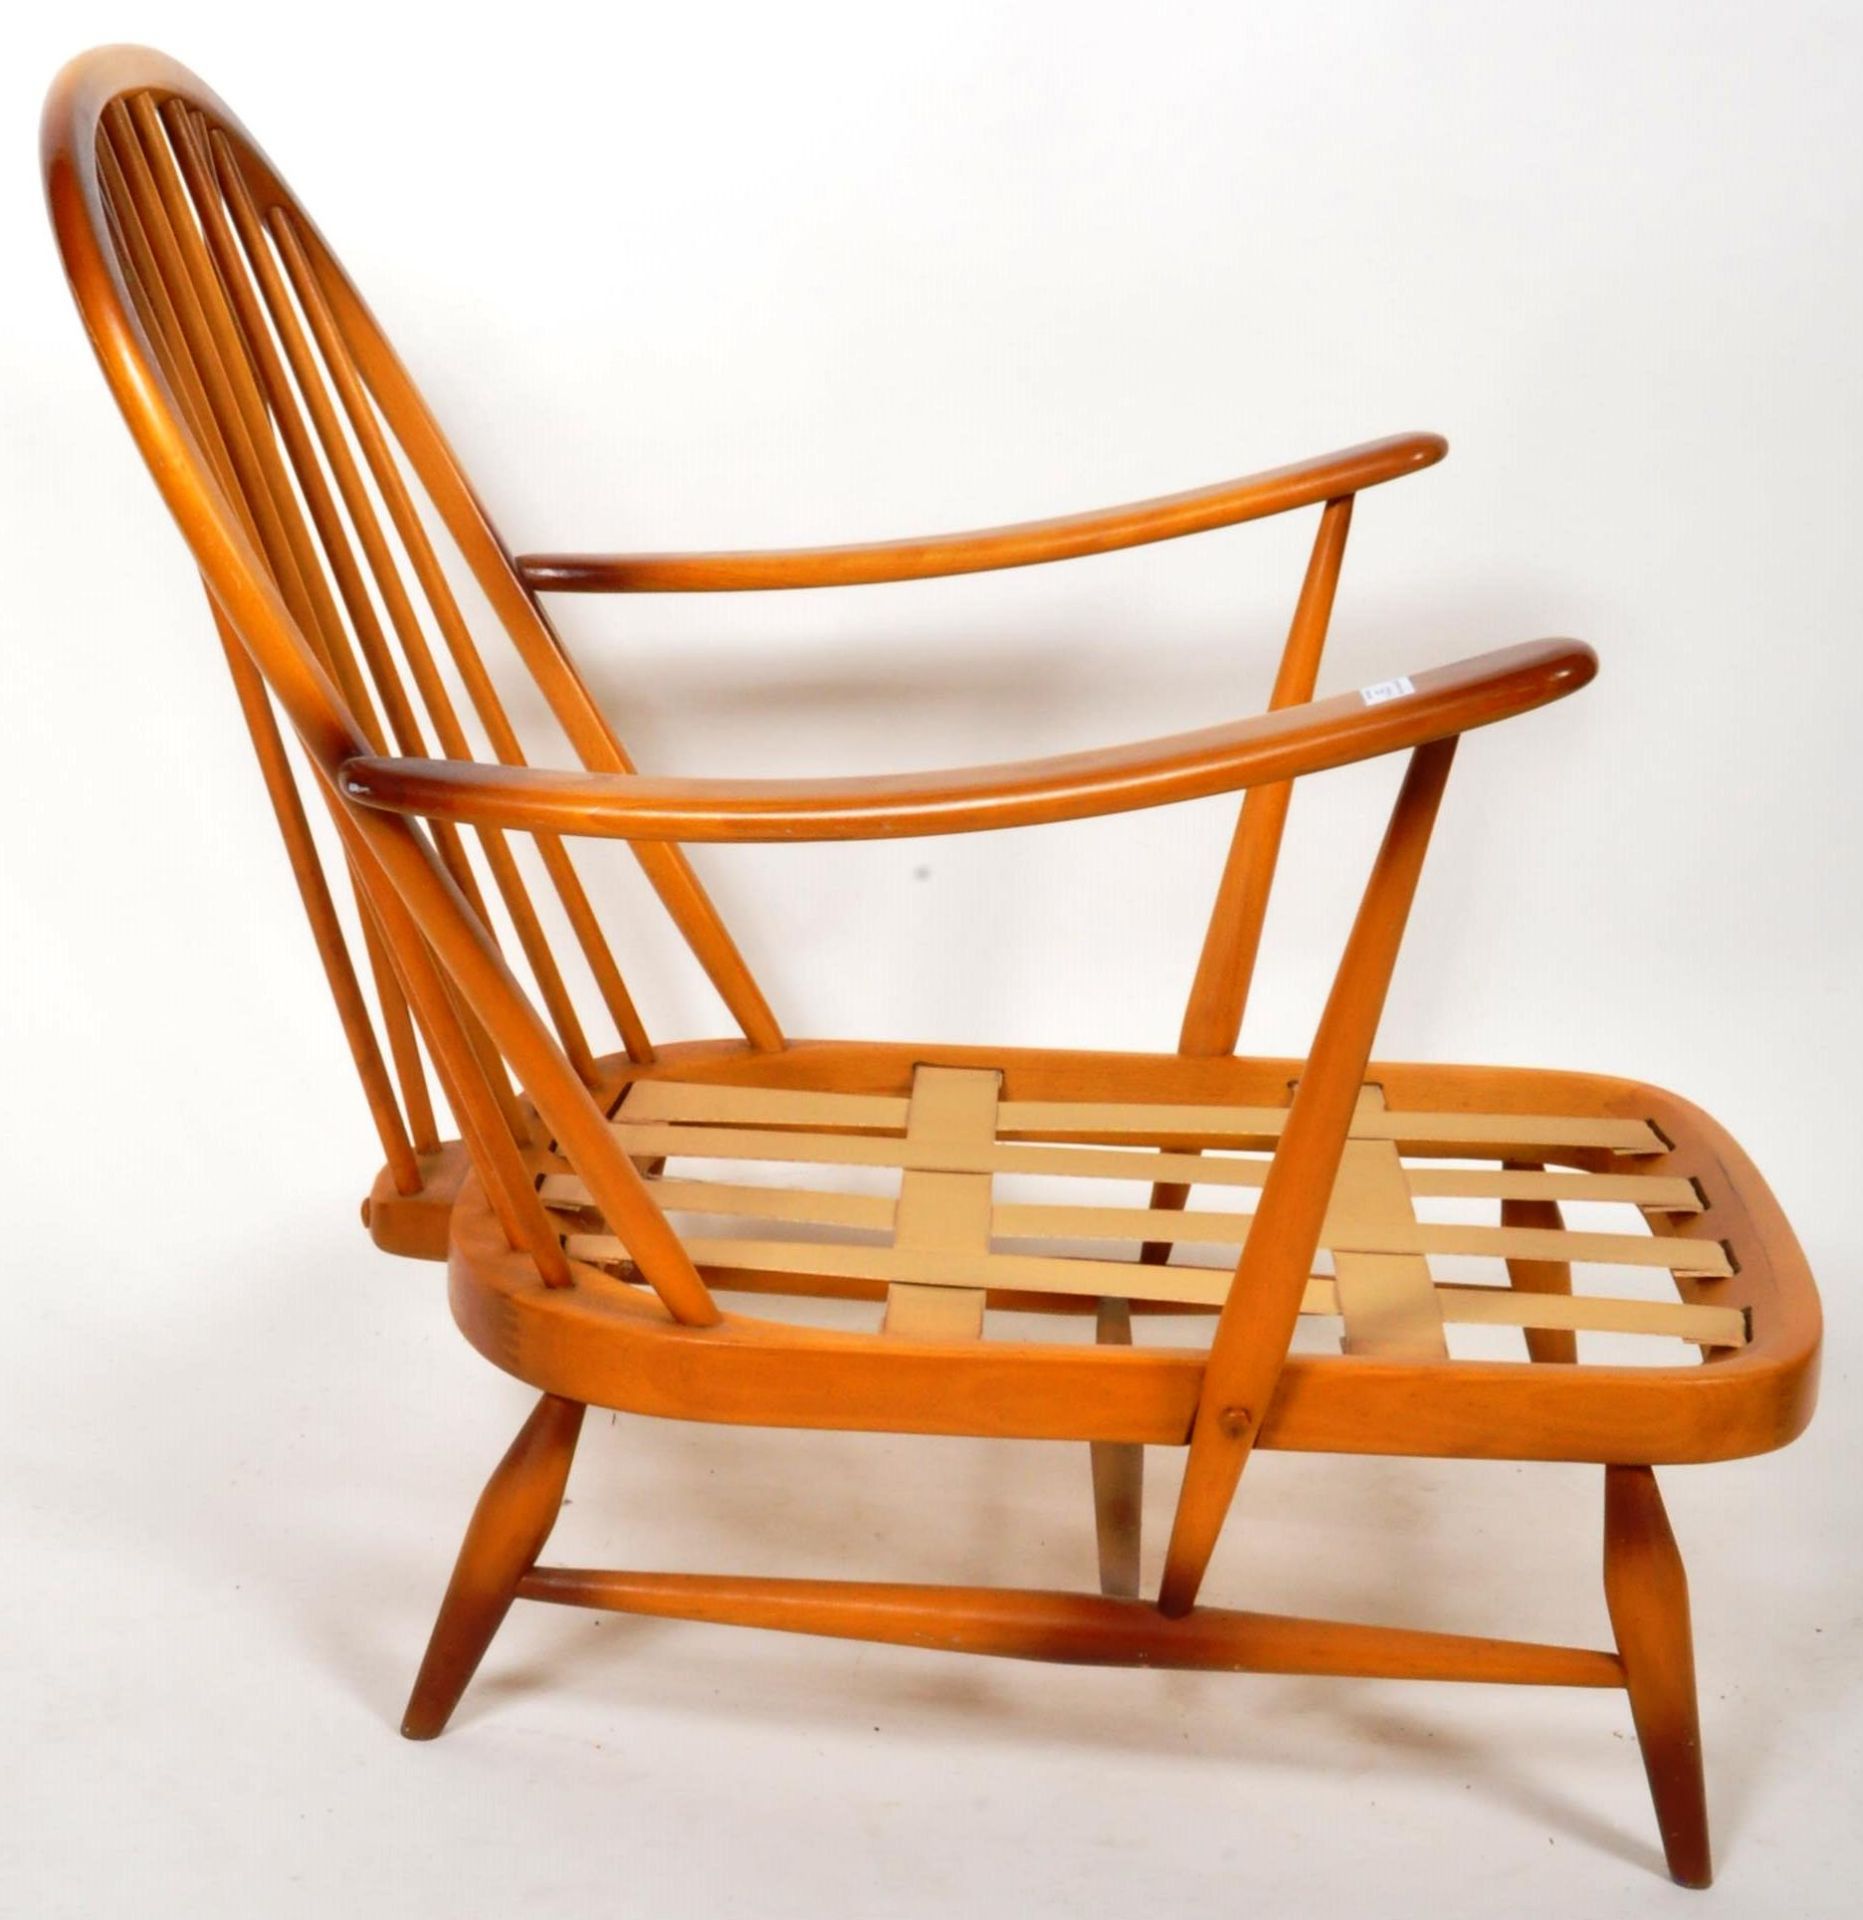 ERCOL MODEL 203 & 205 1970'S LOUNGE CHAIR AND FOOTSTOOL - Image 11 of 14